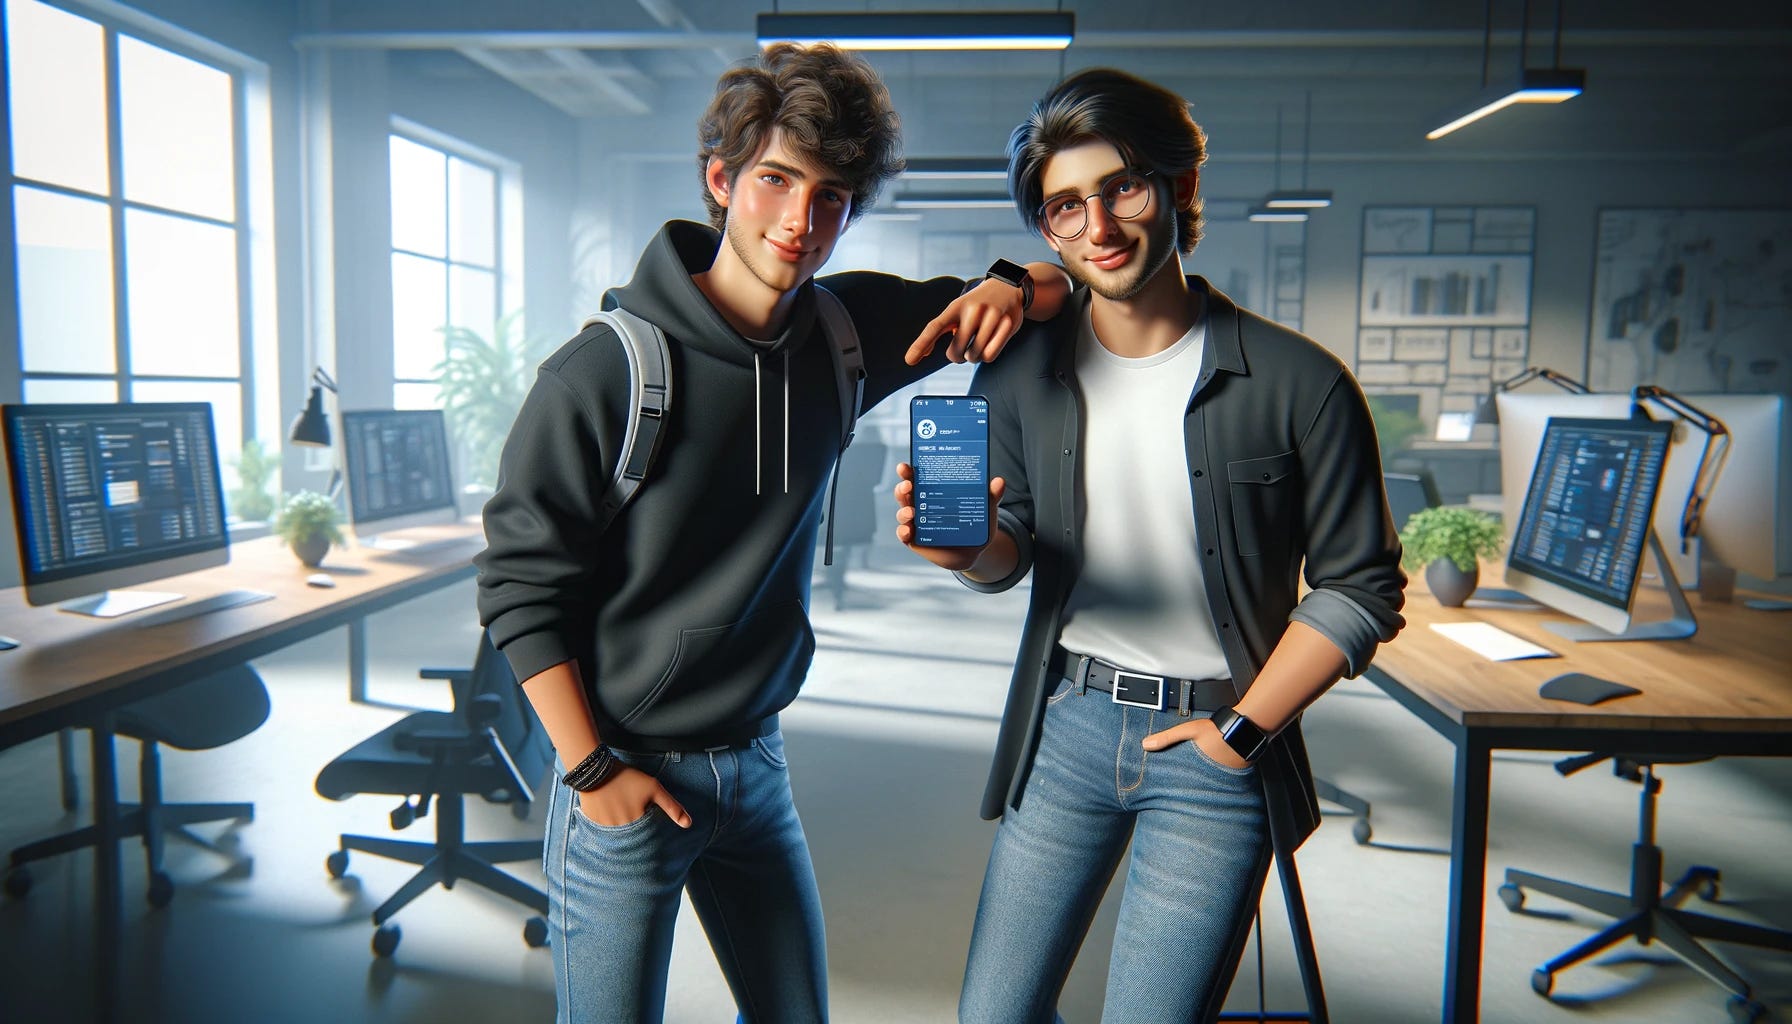 An image depicting two very casual tech workers in a modern office environment, where one is holding a smartphone with a digital version of a signed contract visible on its screen. Both individuals are dressed in casual attire, such as jeans and t-shirts, with at least one wearing a hoodie. They are standing close together, smiling, indicating a shared moment of success. The background features a minimalist office setup with computers, ergonomic chairs, and a few green plants, emphasizing a relaxed yet professional tech workspace atmosphere. This scene represents collaboration and the modern way of finalizing deals in the tech industry.